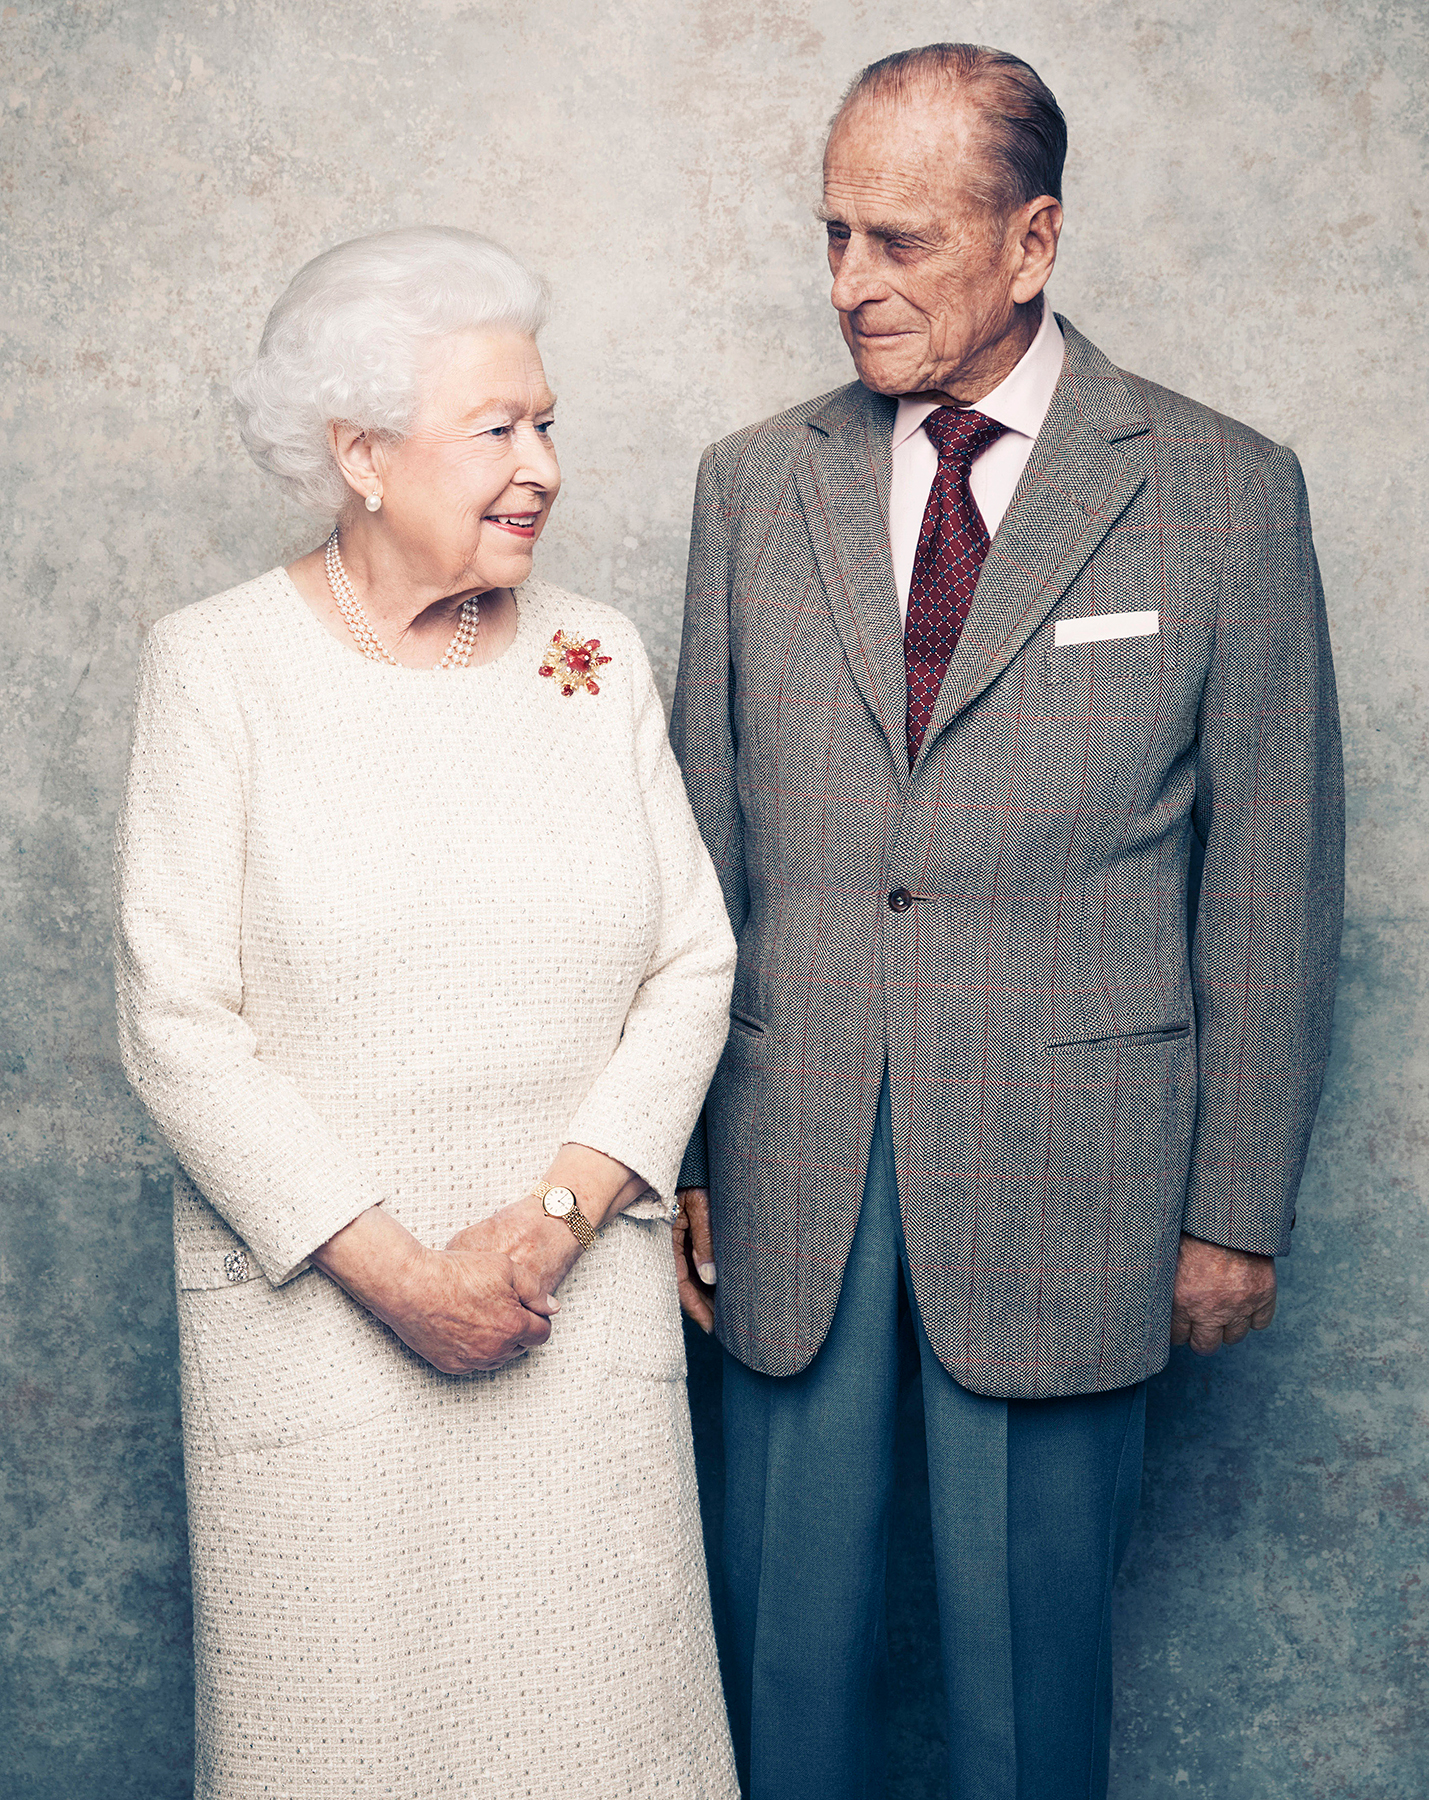 Image result for queen elizabeth ii and prince philip 70th wedding anniversary